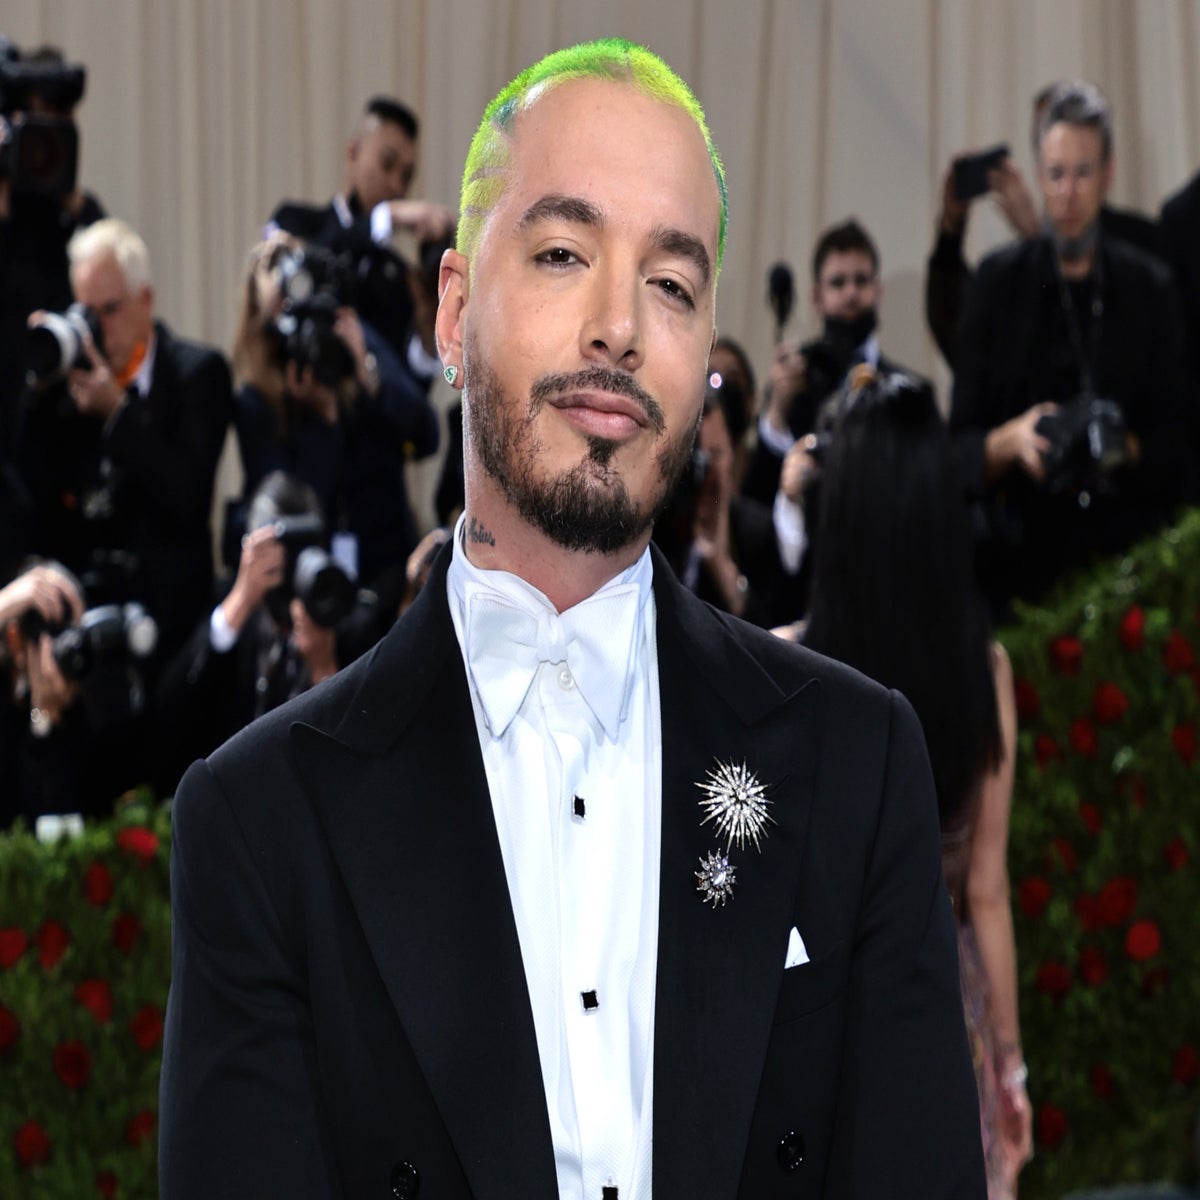 J Balvin Learned that 'Being Rich' Means 'Being Healthy, Happy at Peace